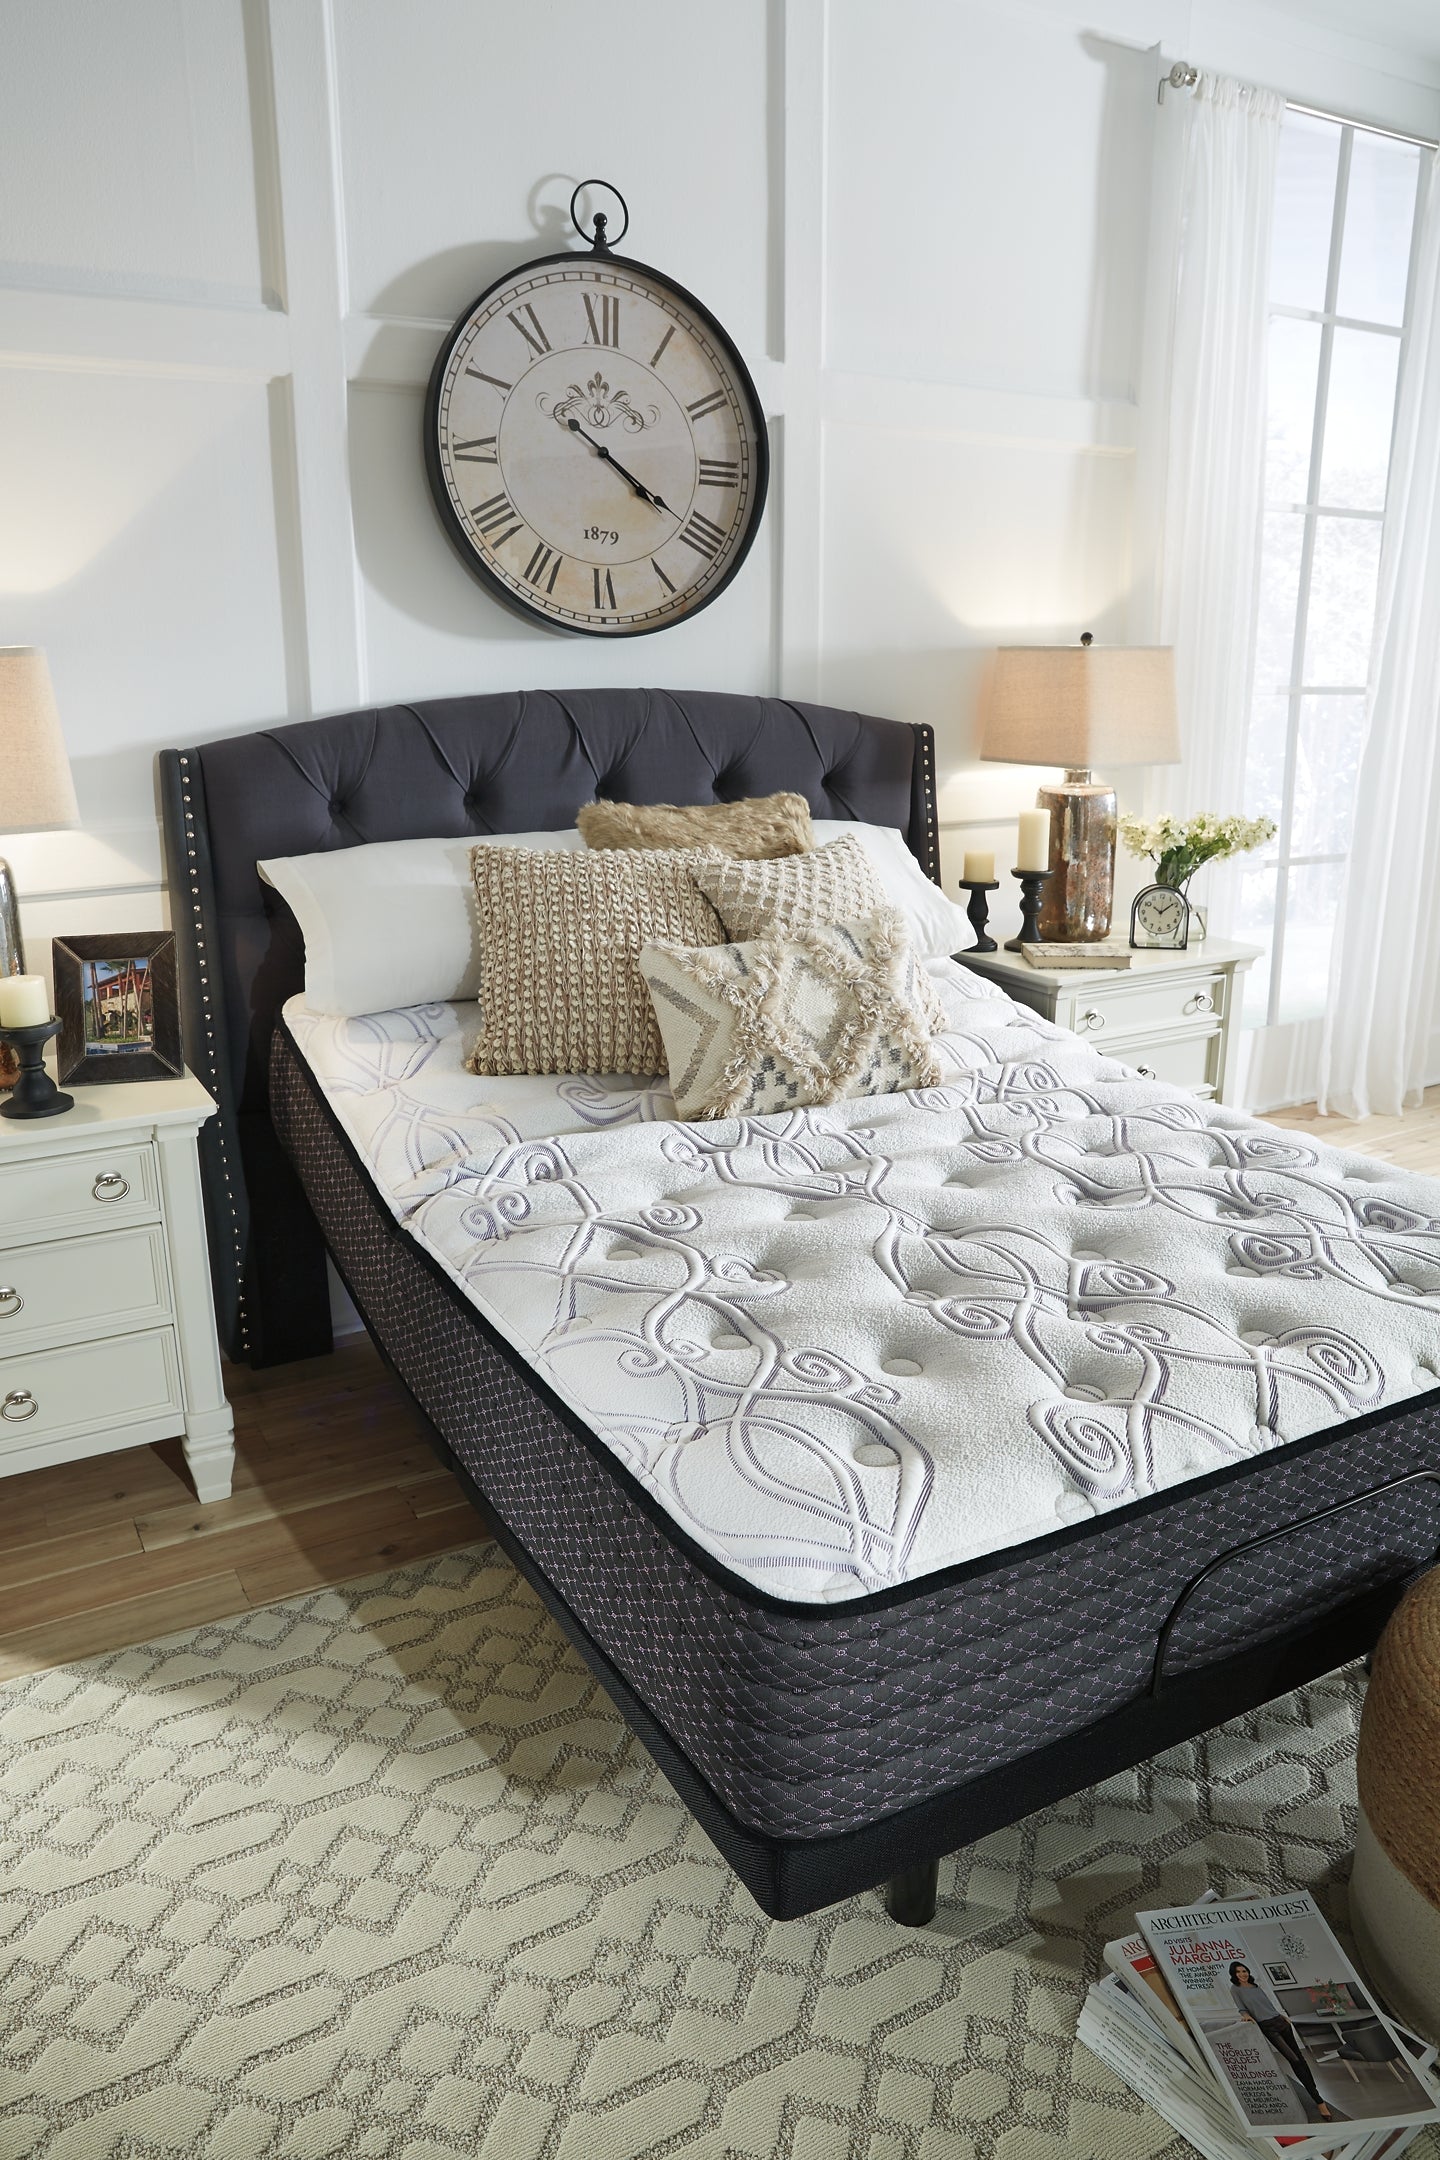 Limited Edition Plush Mattress with Adjustable Base